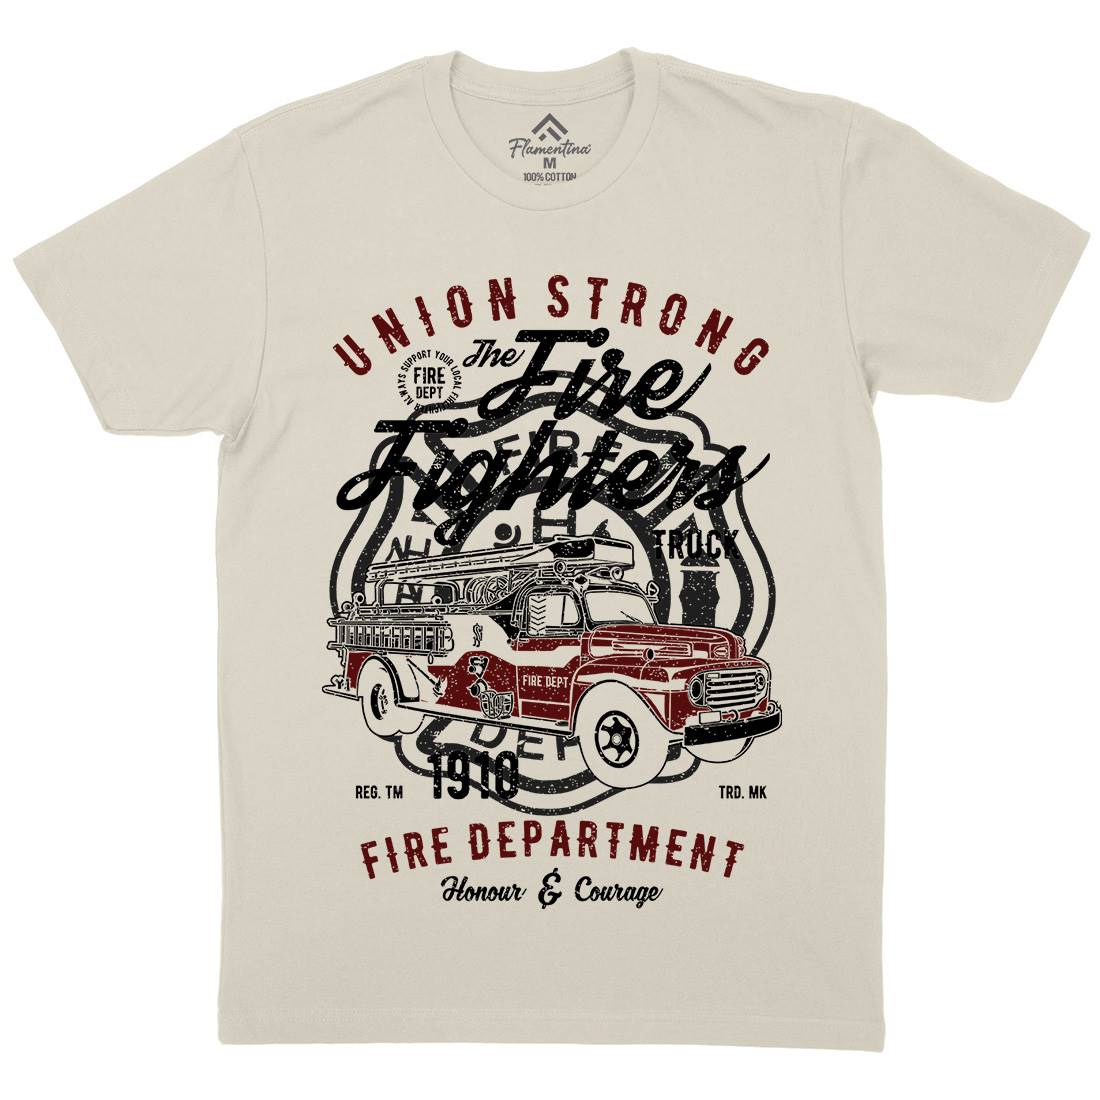 Union Strong Mens Organic Crew Neck T-Shirt Firefighters A781